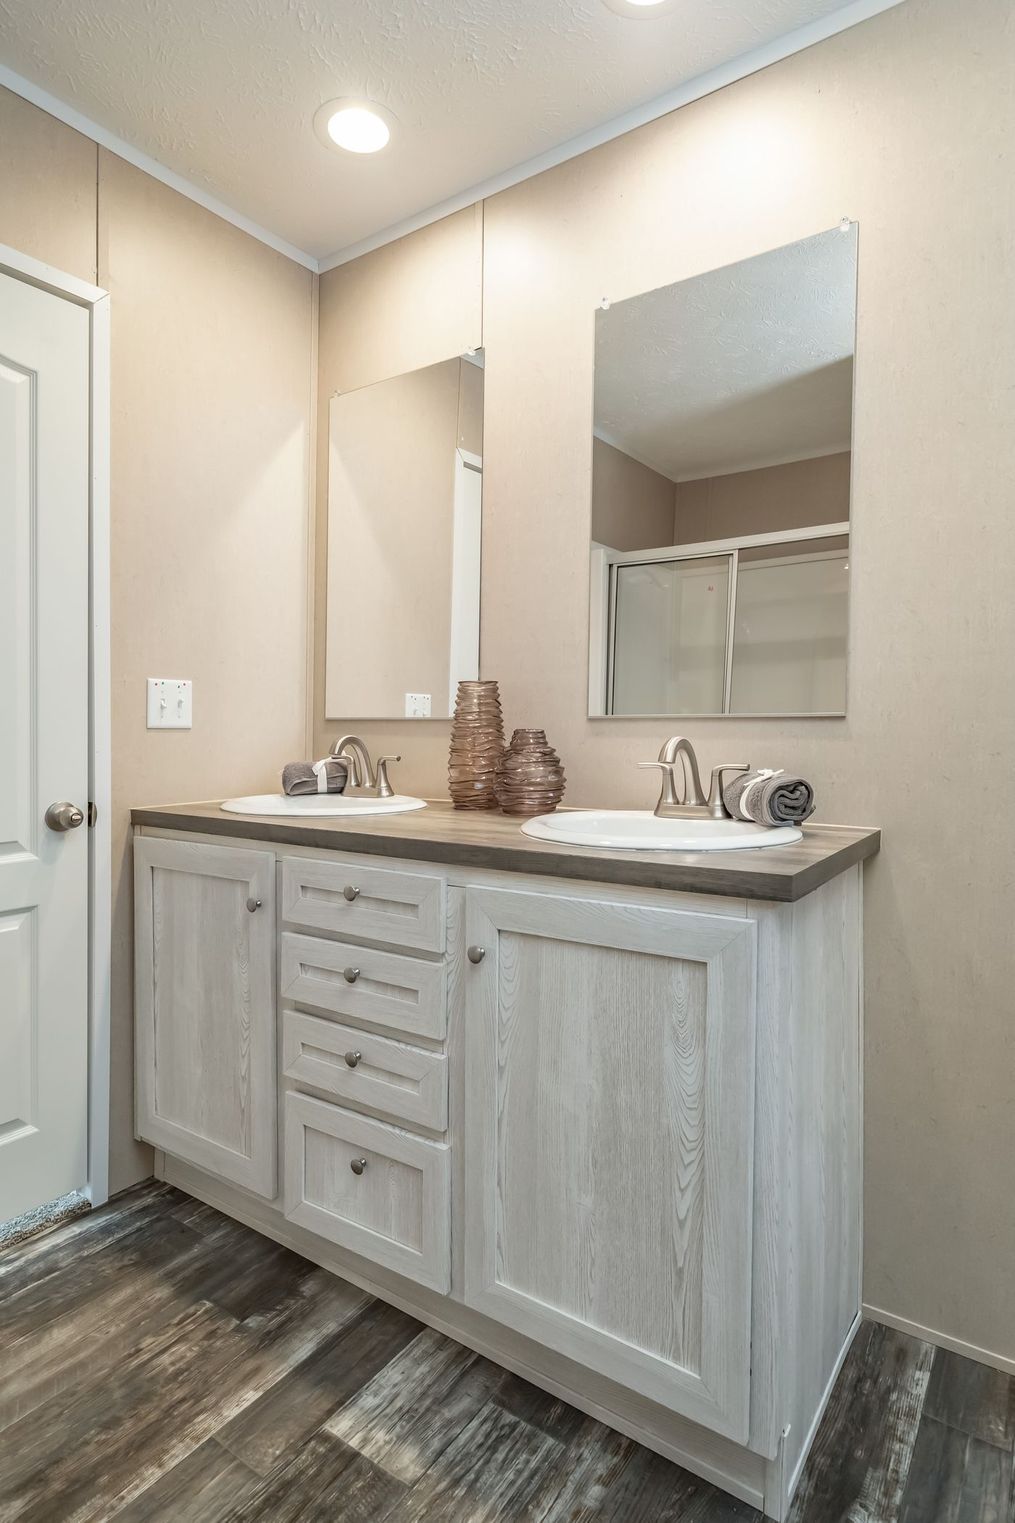 The ULTRA EXCEL 3 BR 28X56 Master Bathroom. This Manufactured Mobile Home features 3 bedrooms and 2 baths.